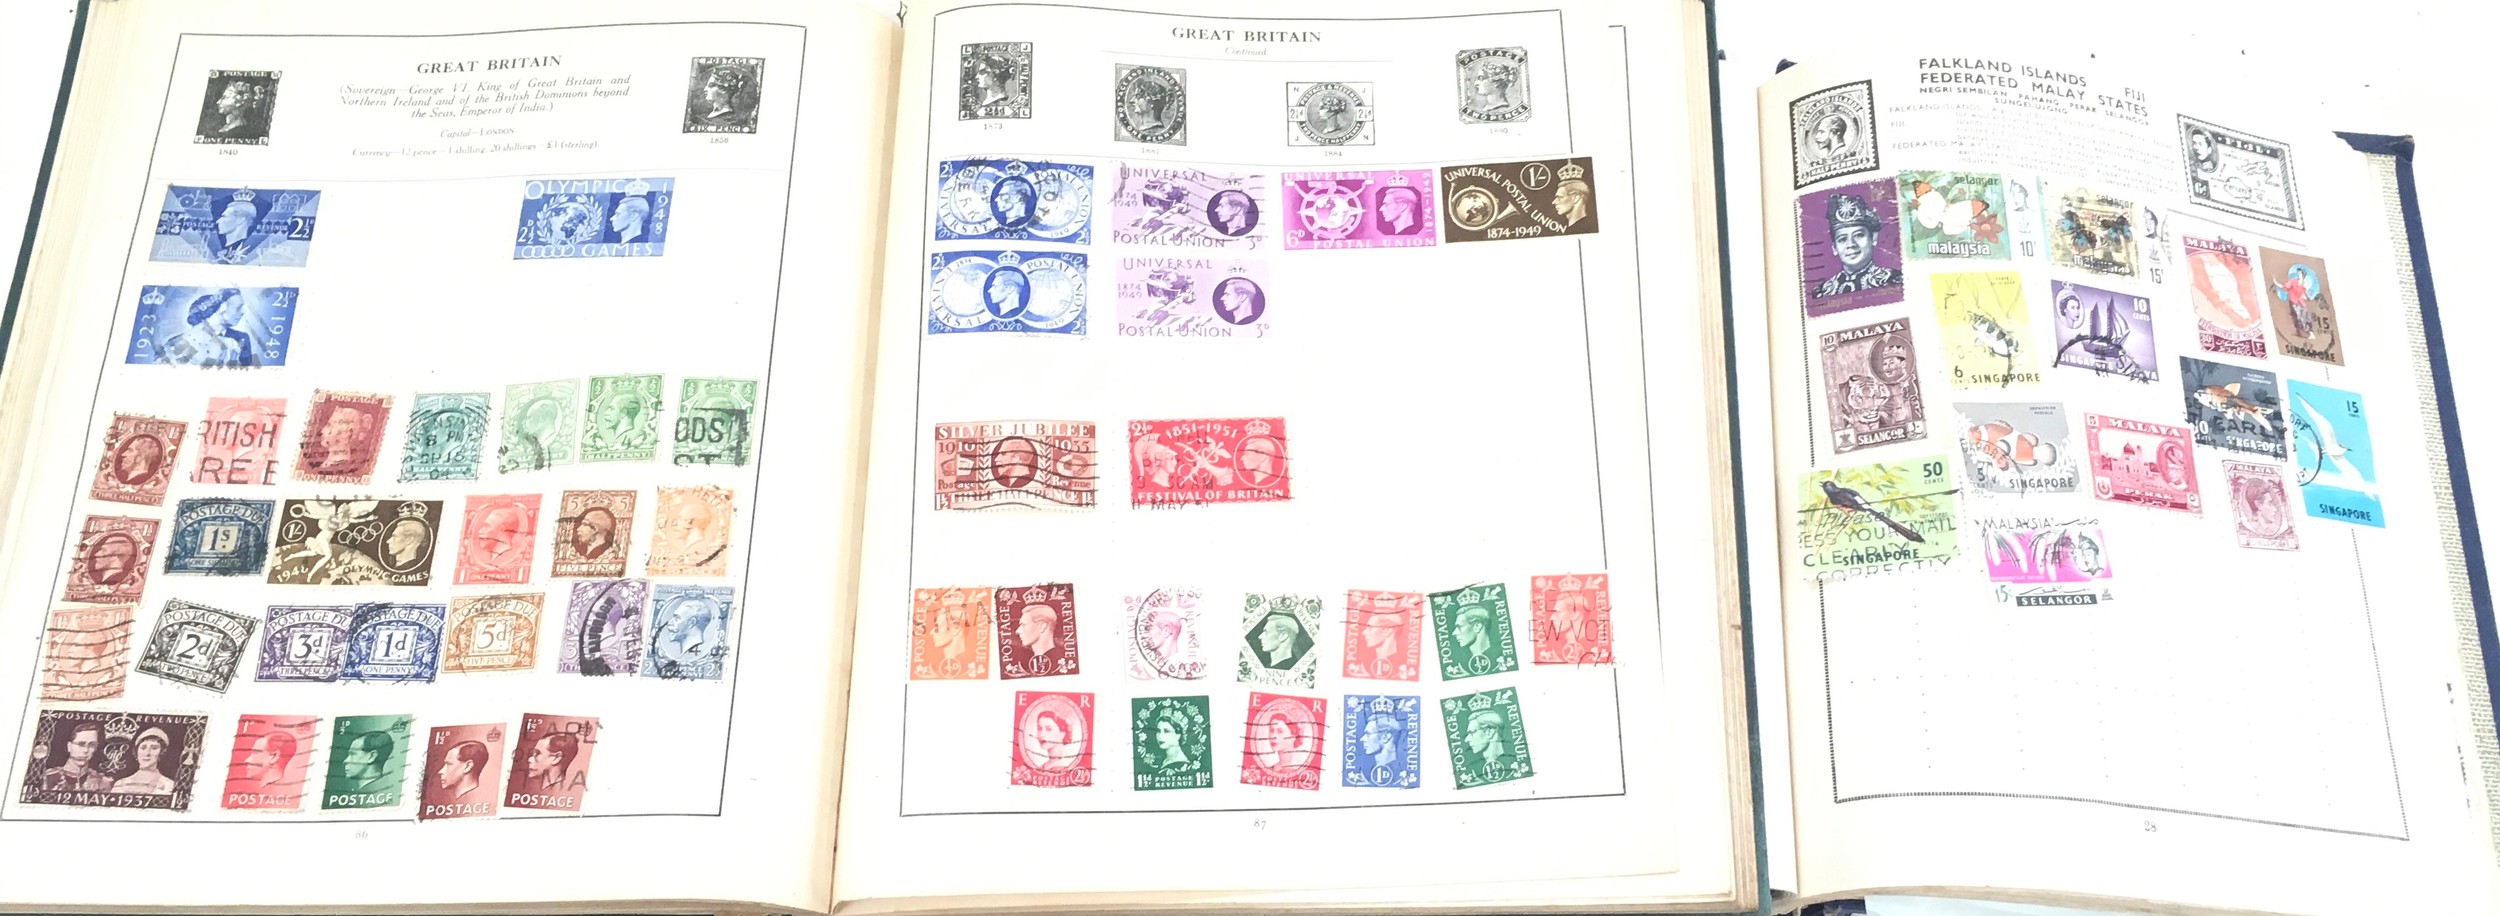 Two old stamp albums. - Image 2 of 5